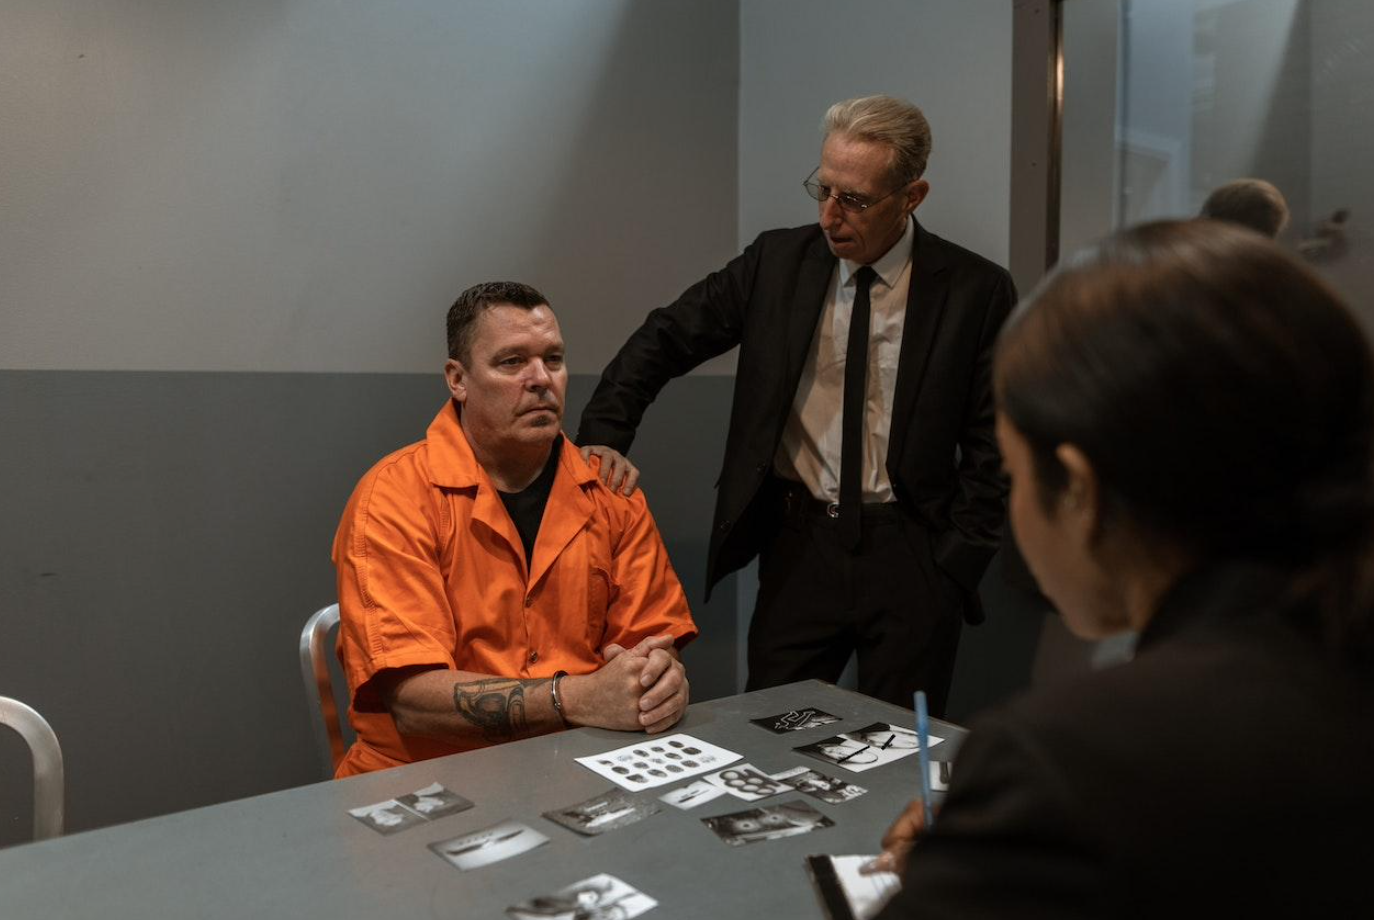 Man in prison orange sitting with man in suit standing and woman sitting across the table; image by RODNAE Productions, via Pexels.com.